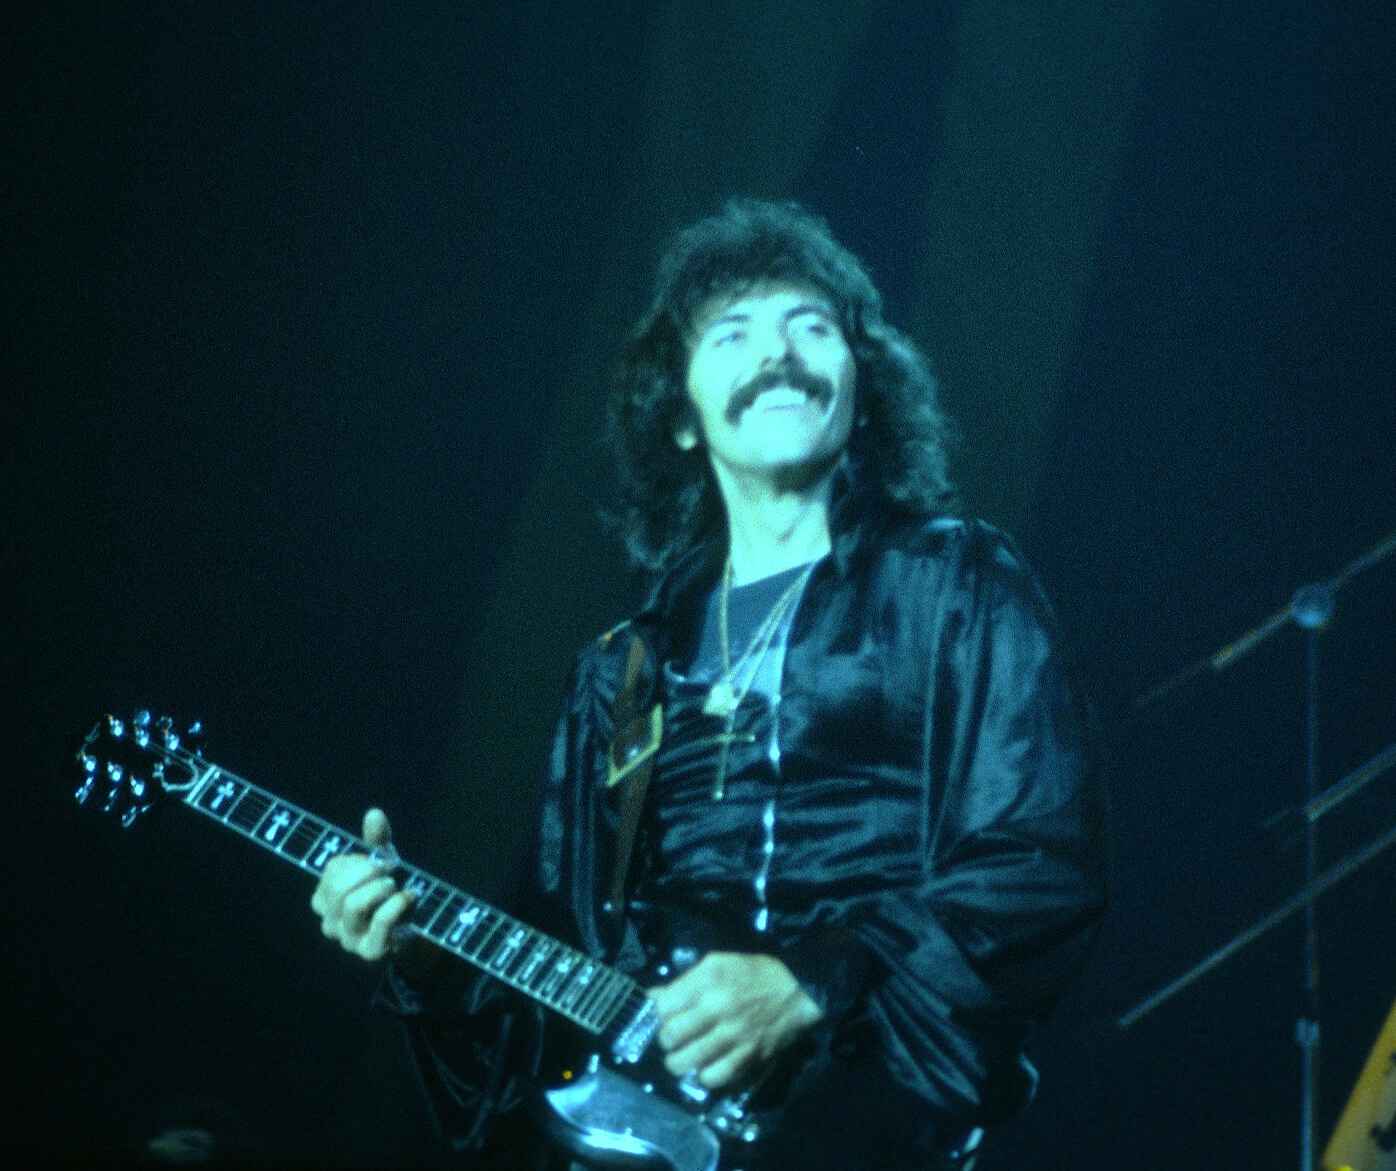 Happy 75th (!!!) birthday to my all time favorite rock musician, the one, the only, Tony Iommi. 